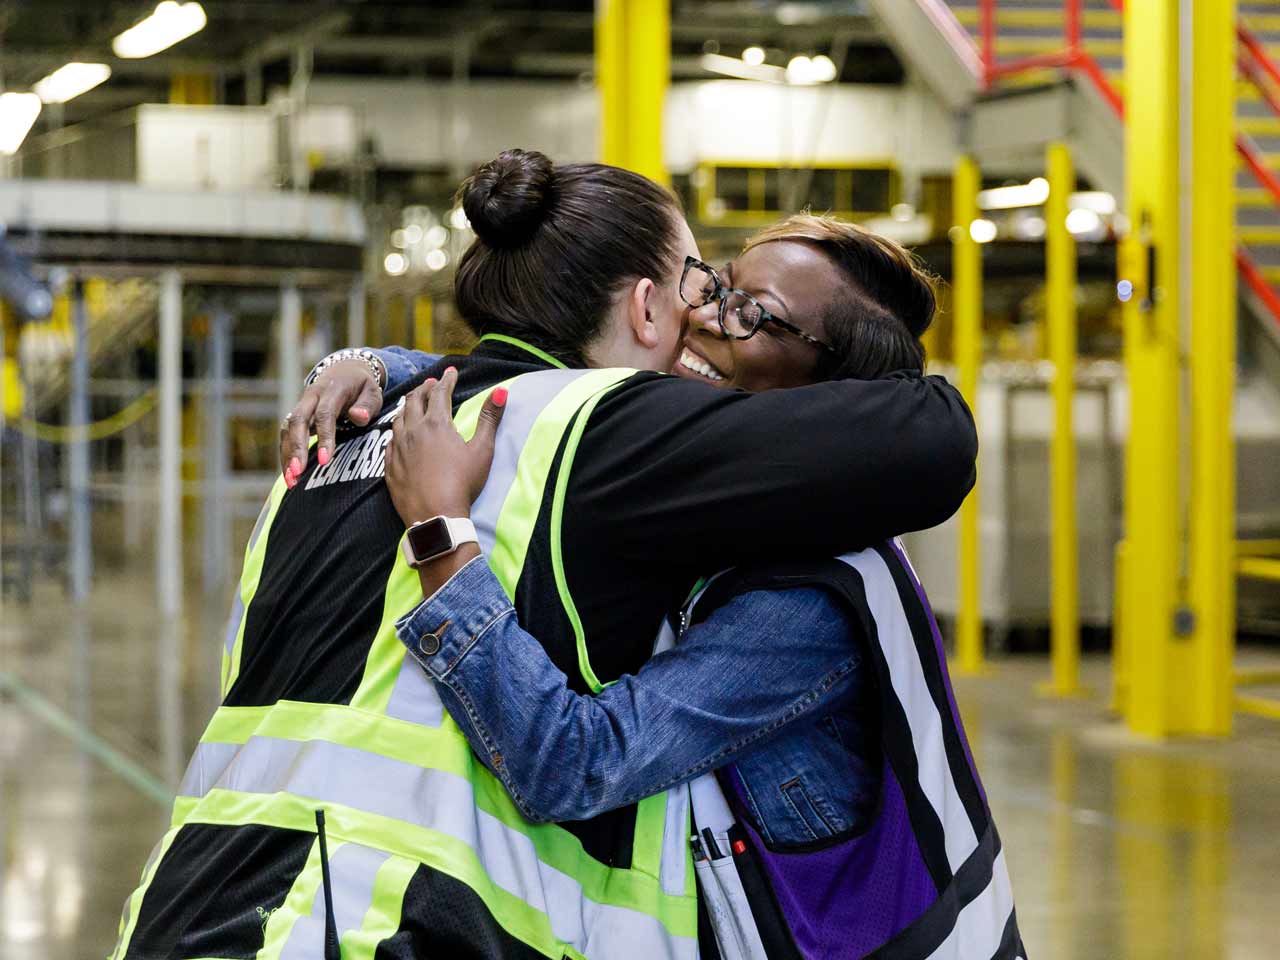 Two female Amazon employees wearing reflective vests share a warm hug standing on the production floor of an Amazon warehouse